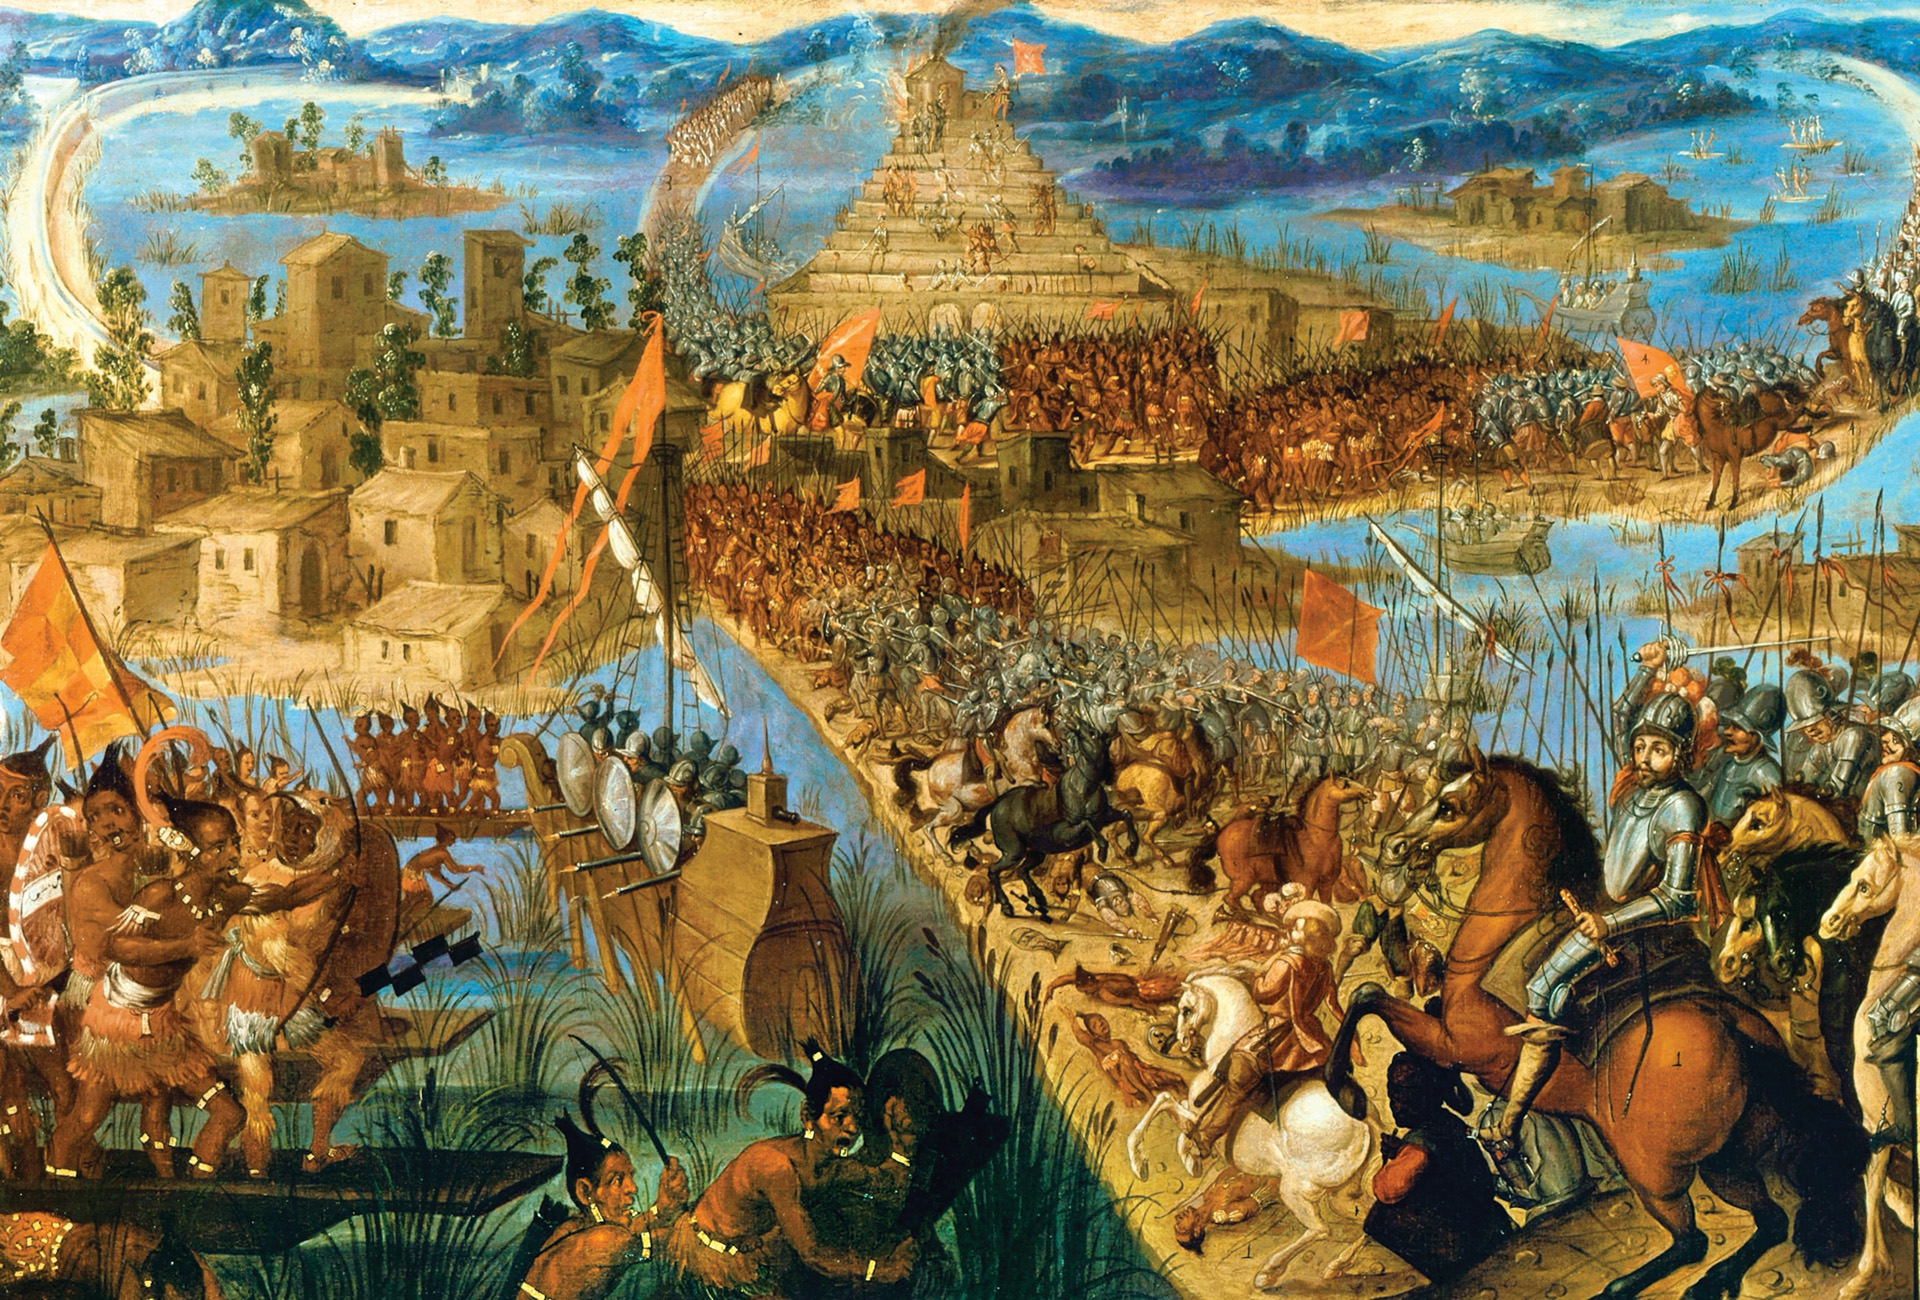 Cortes' army crosses a causeway to assault Tenochtitlan. Cortes enticed the Aztecs into making costly sorties by sending their tribal enemies against them while holding his Spanish troops in reserve.